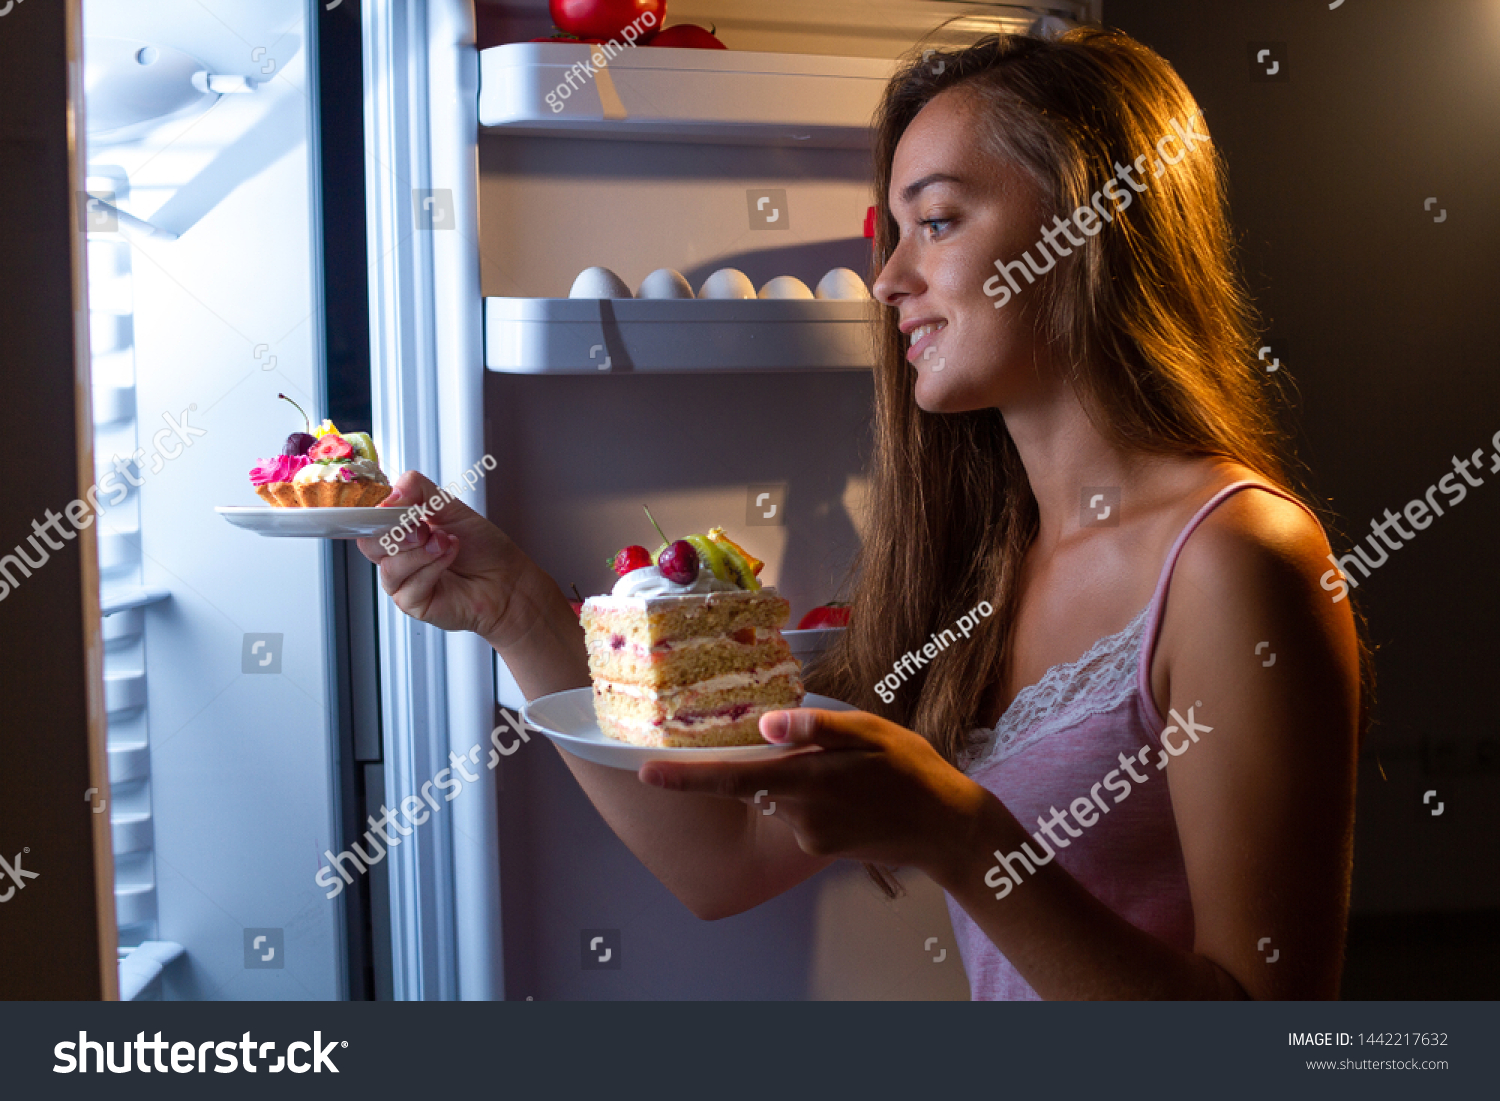 Hungry woman in pajamas eats and enjoys cakes  at night near refrigerator. Stop diet and gain extra pounds due to carbs food and unhealthy night eating  #1442217632